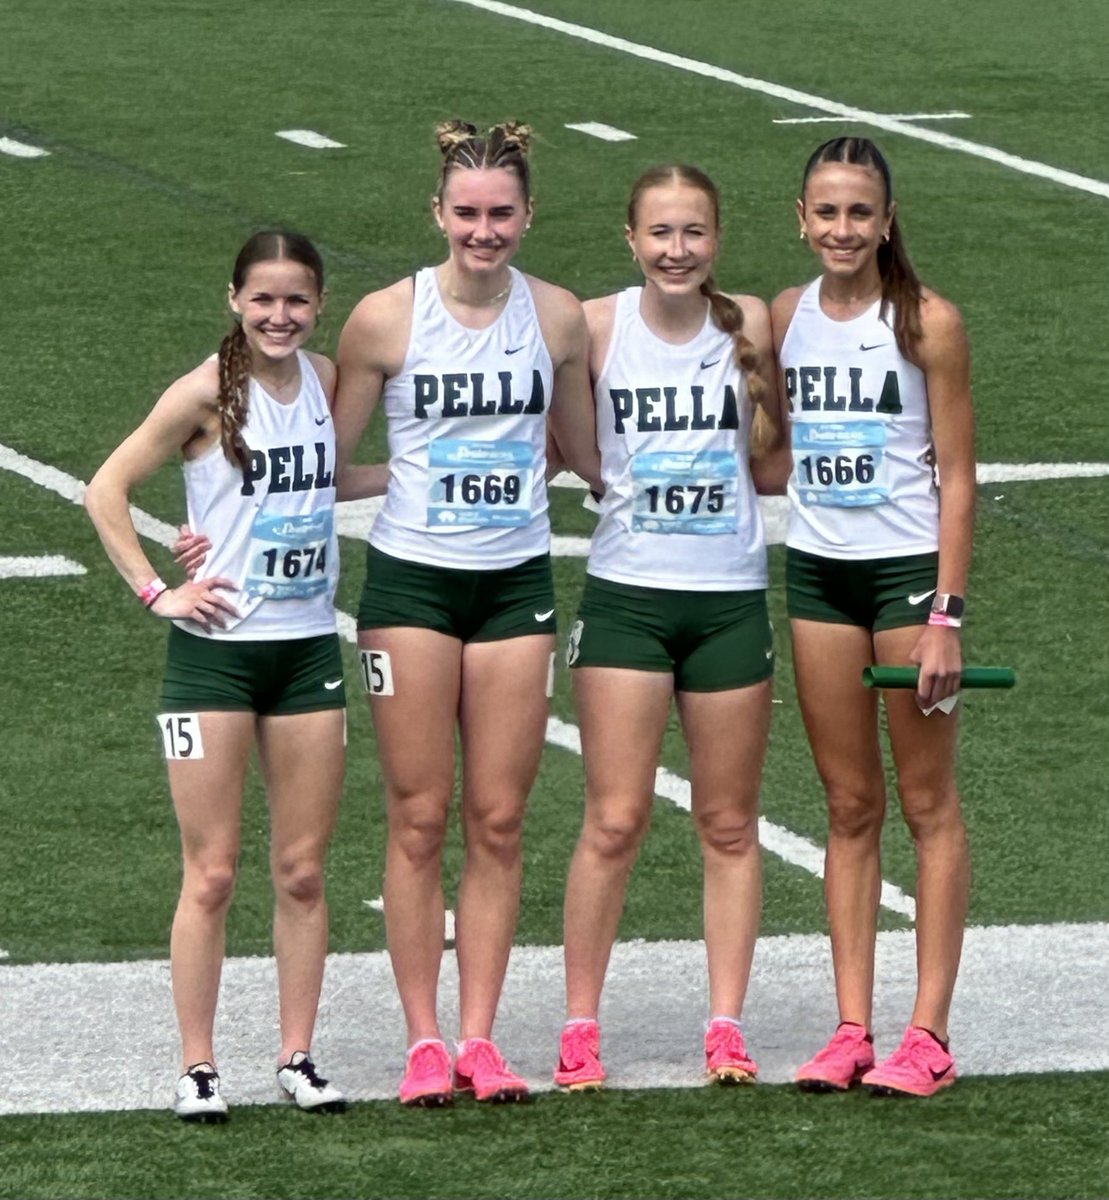 First Pella 4x800 Girls’ team to race @DrakeRelays 😎 

They embraced the opportunity and challenge beautifully 

@PellaActivities @PHSdutchtrack  #iahstrk